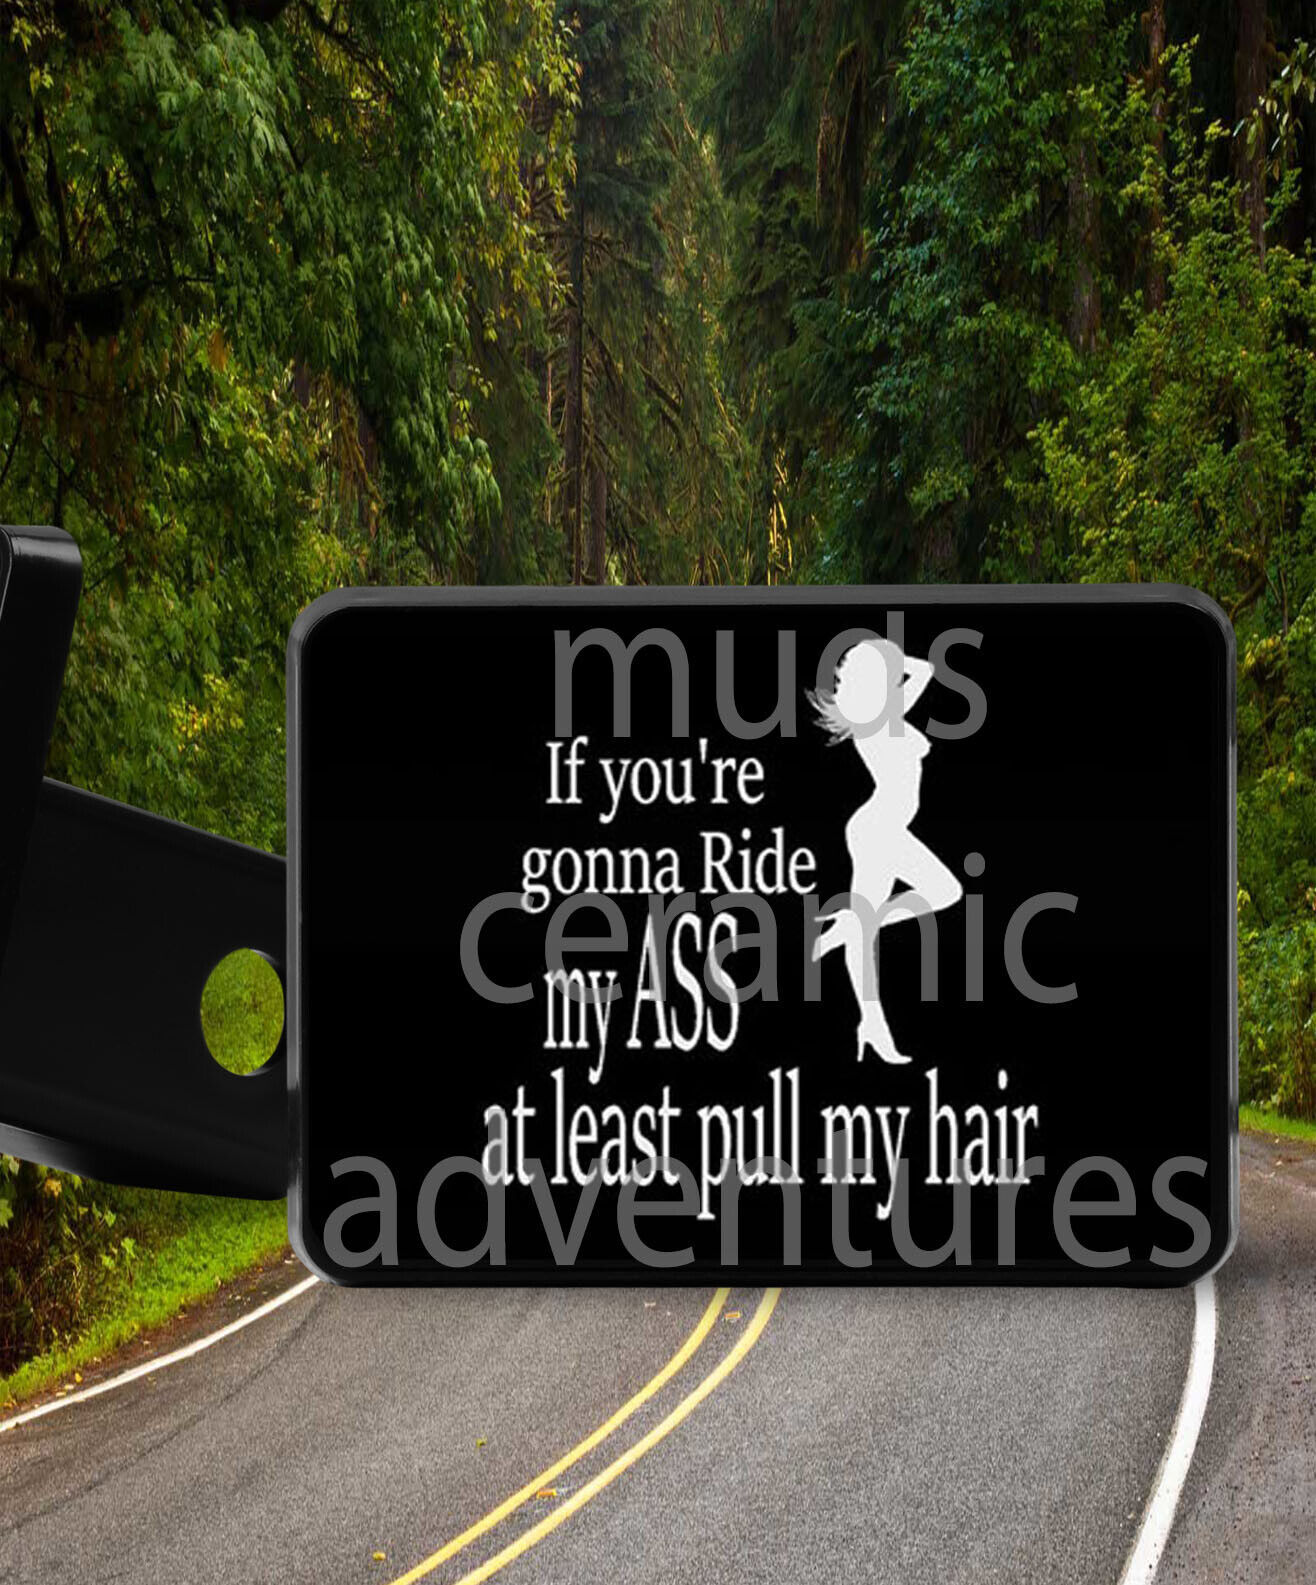 If You're gonna Ride my Ass at least pull my hair Trailer Hitch Cover Plug